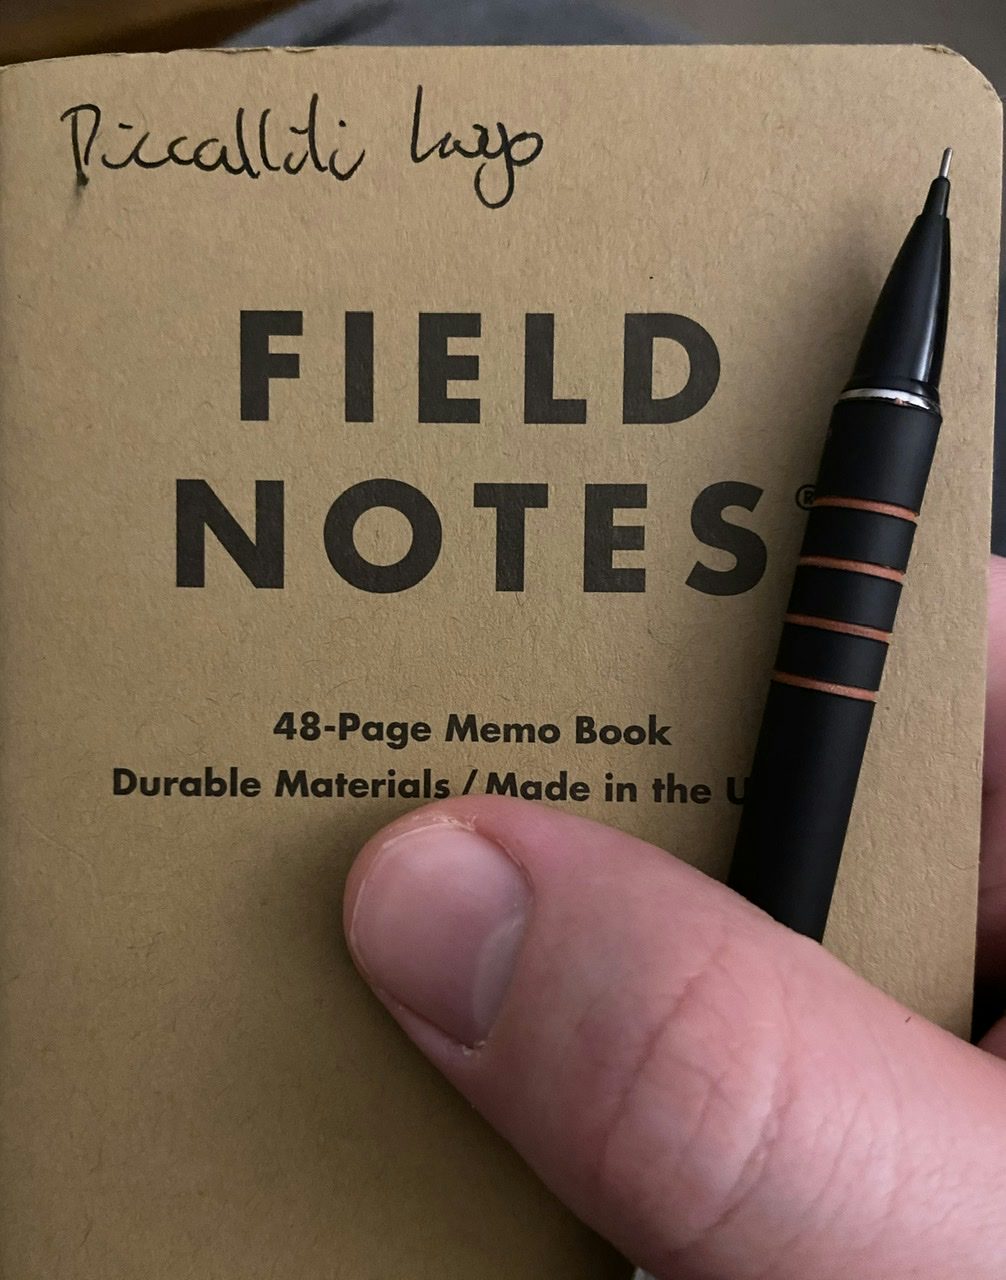 Field Notes notebook with "piccalilli logo" written on it with black ink